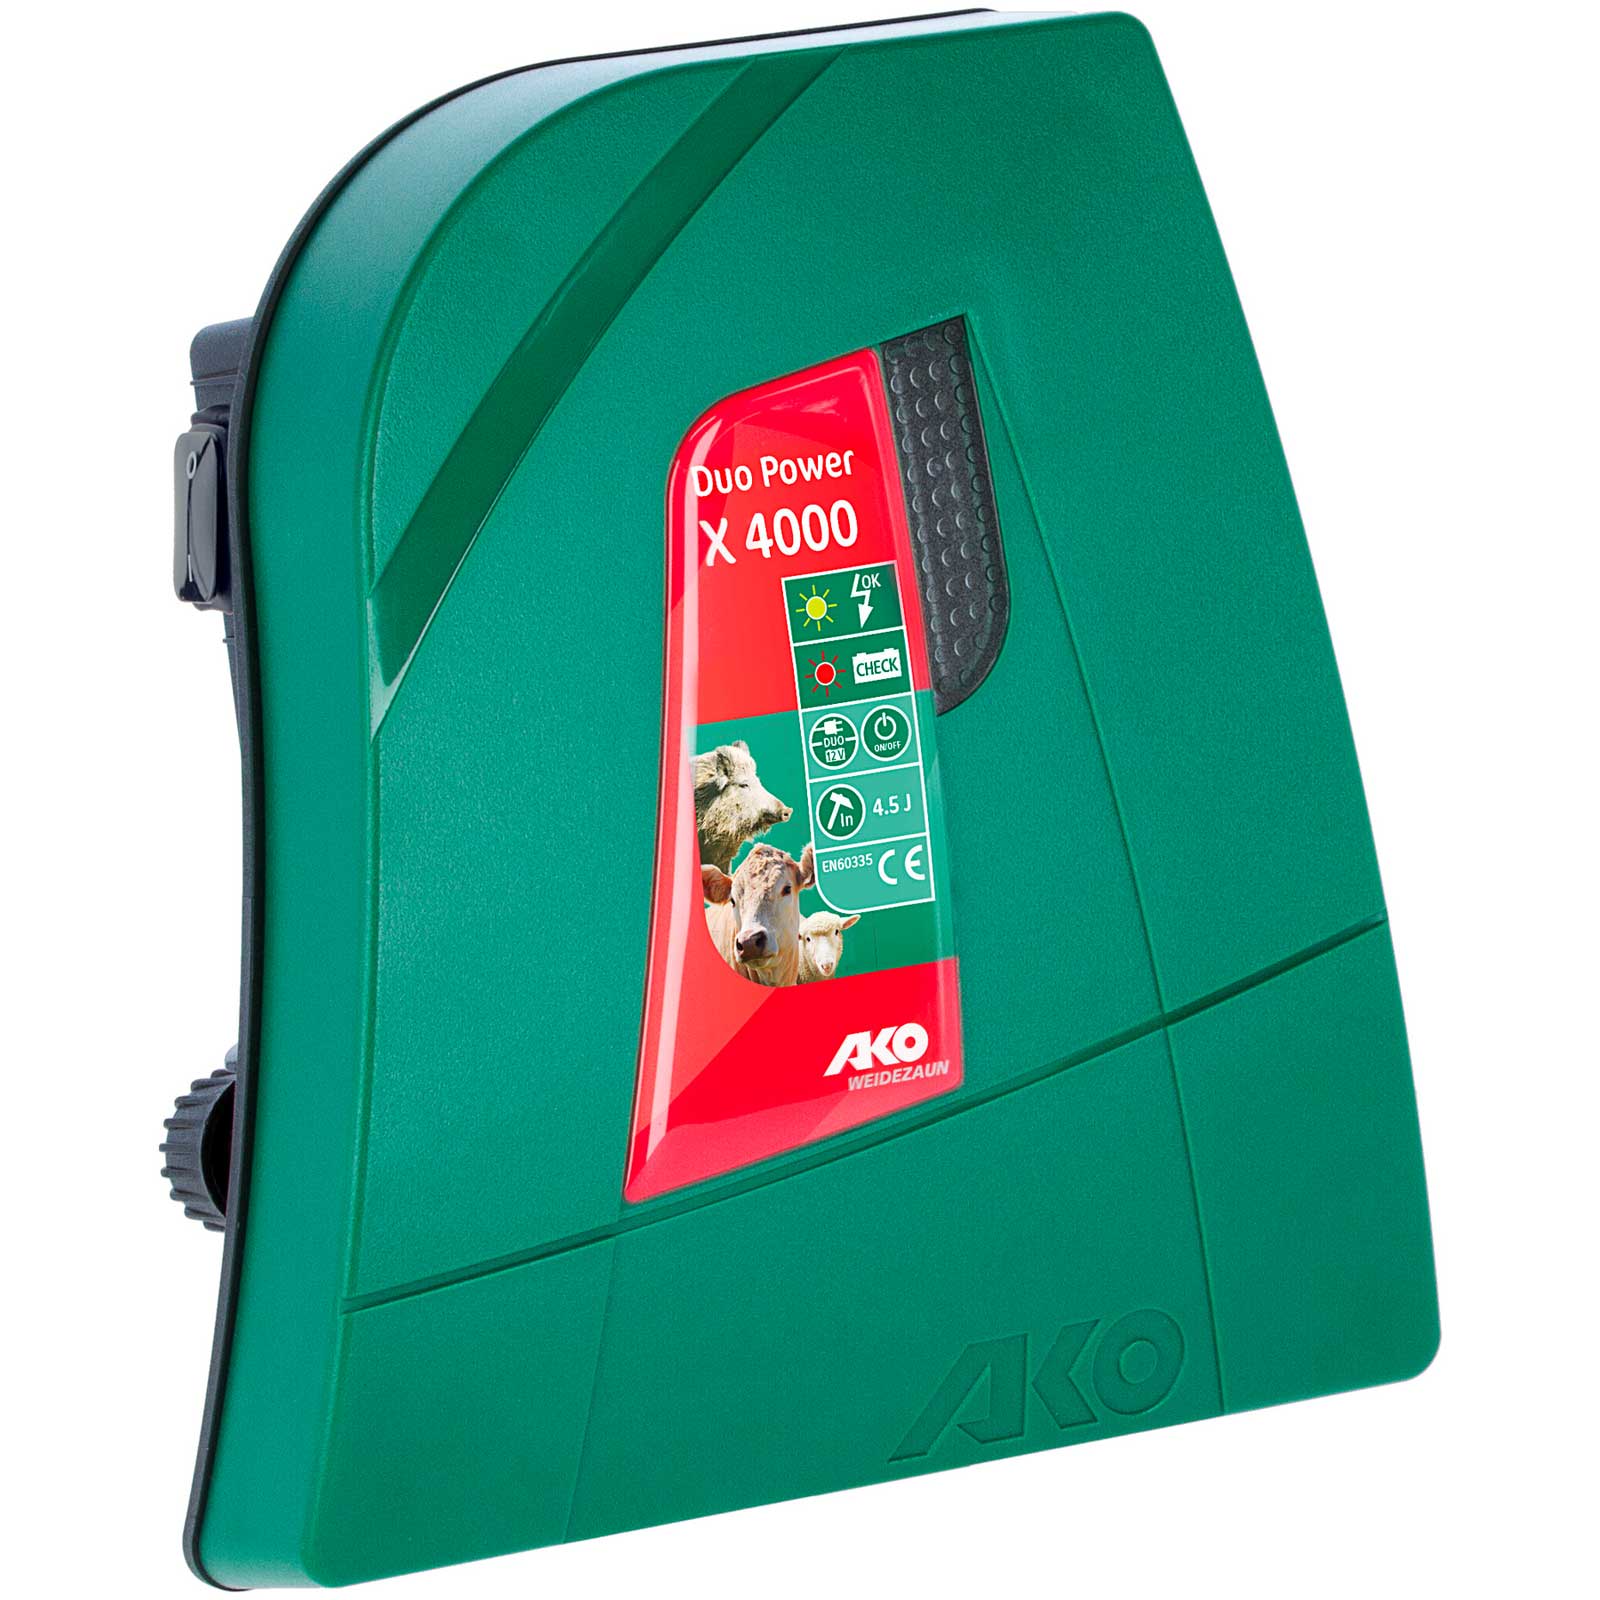 AKO Duo Power X 4000 electric fence energiser DUO 12V / 230V, 4,5 joules